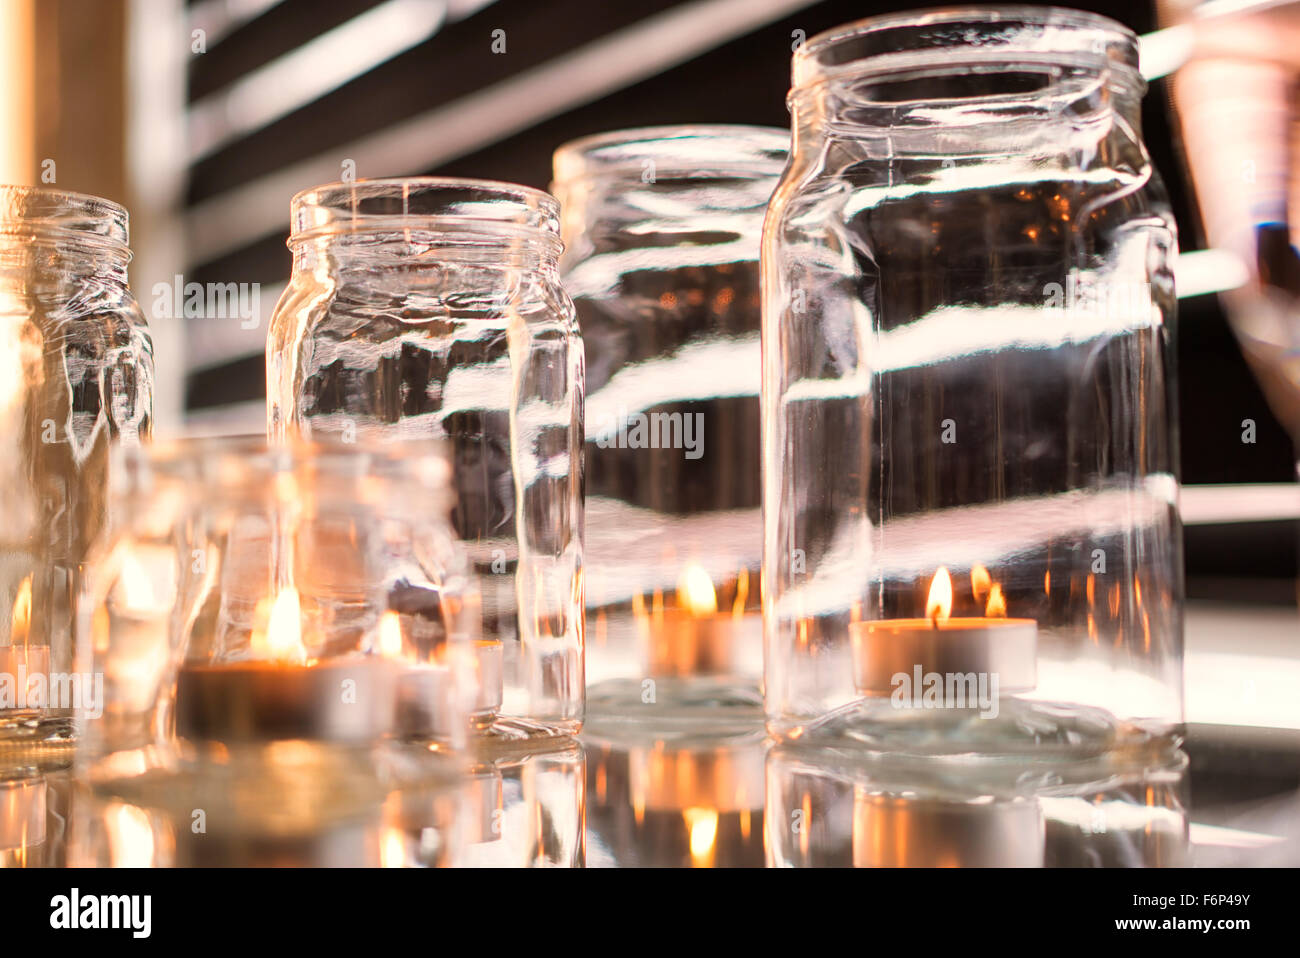 Candles in glass jars Stock Photo